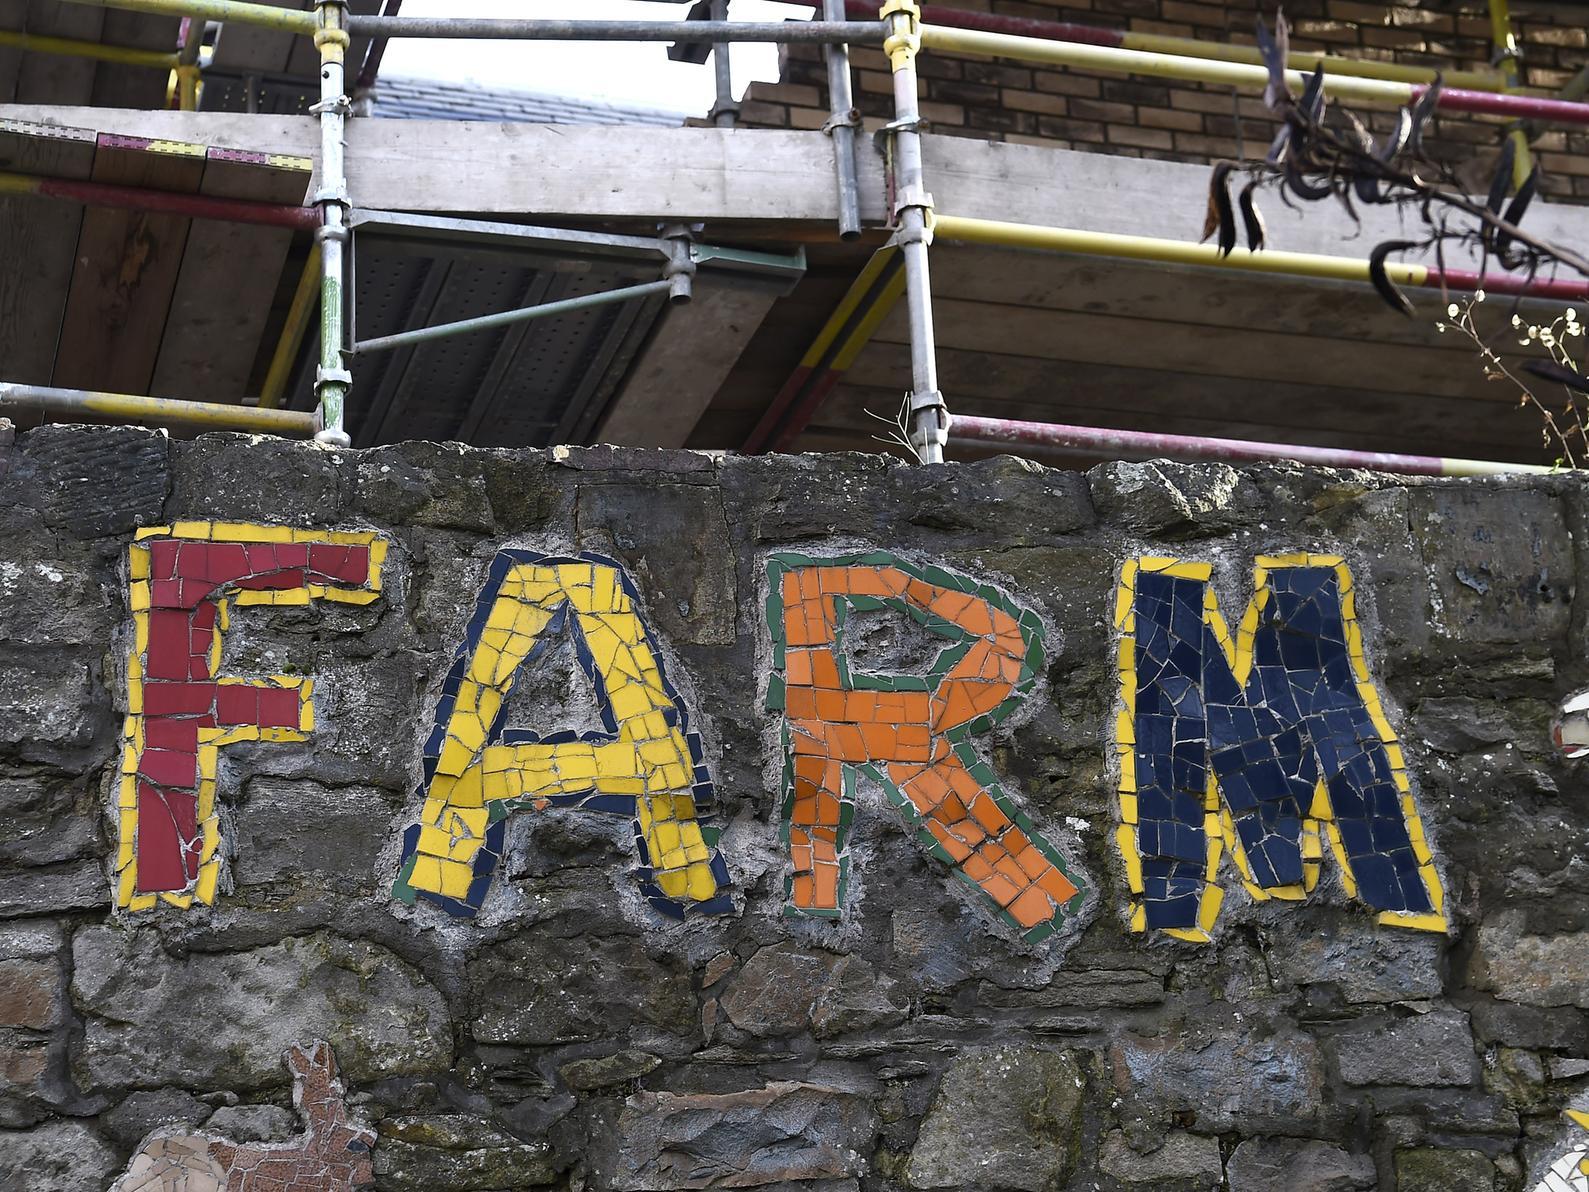 After a huge fundraising effort, three charities are now bidding to take over the site of the beloved farm by the coming spring.